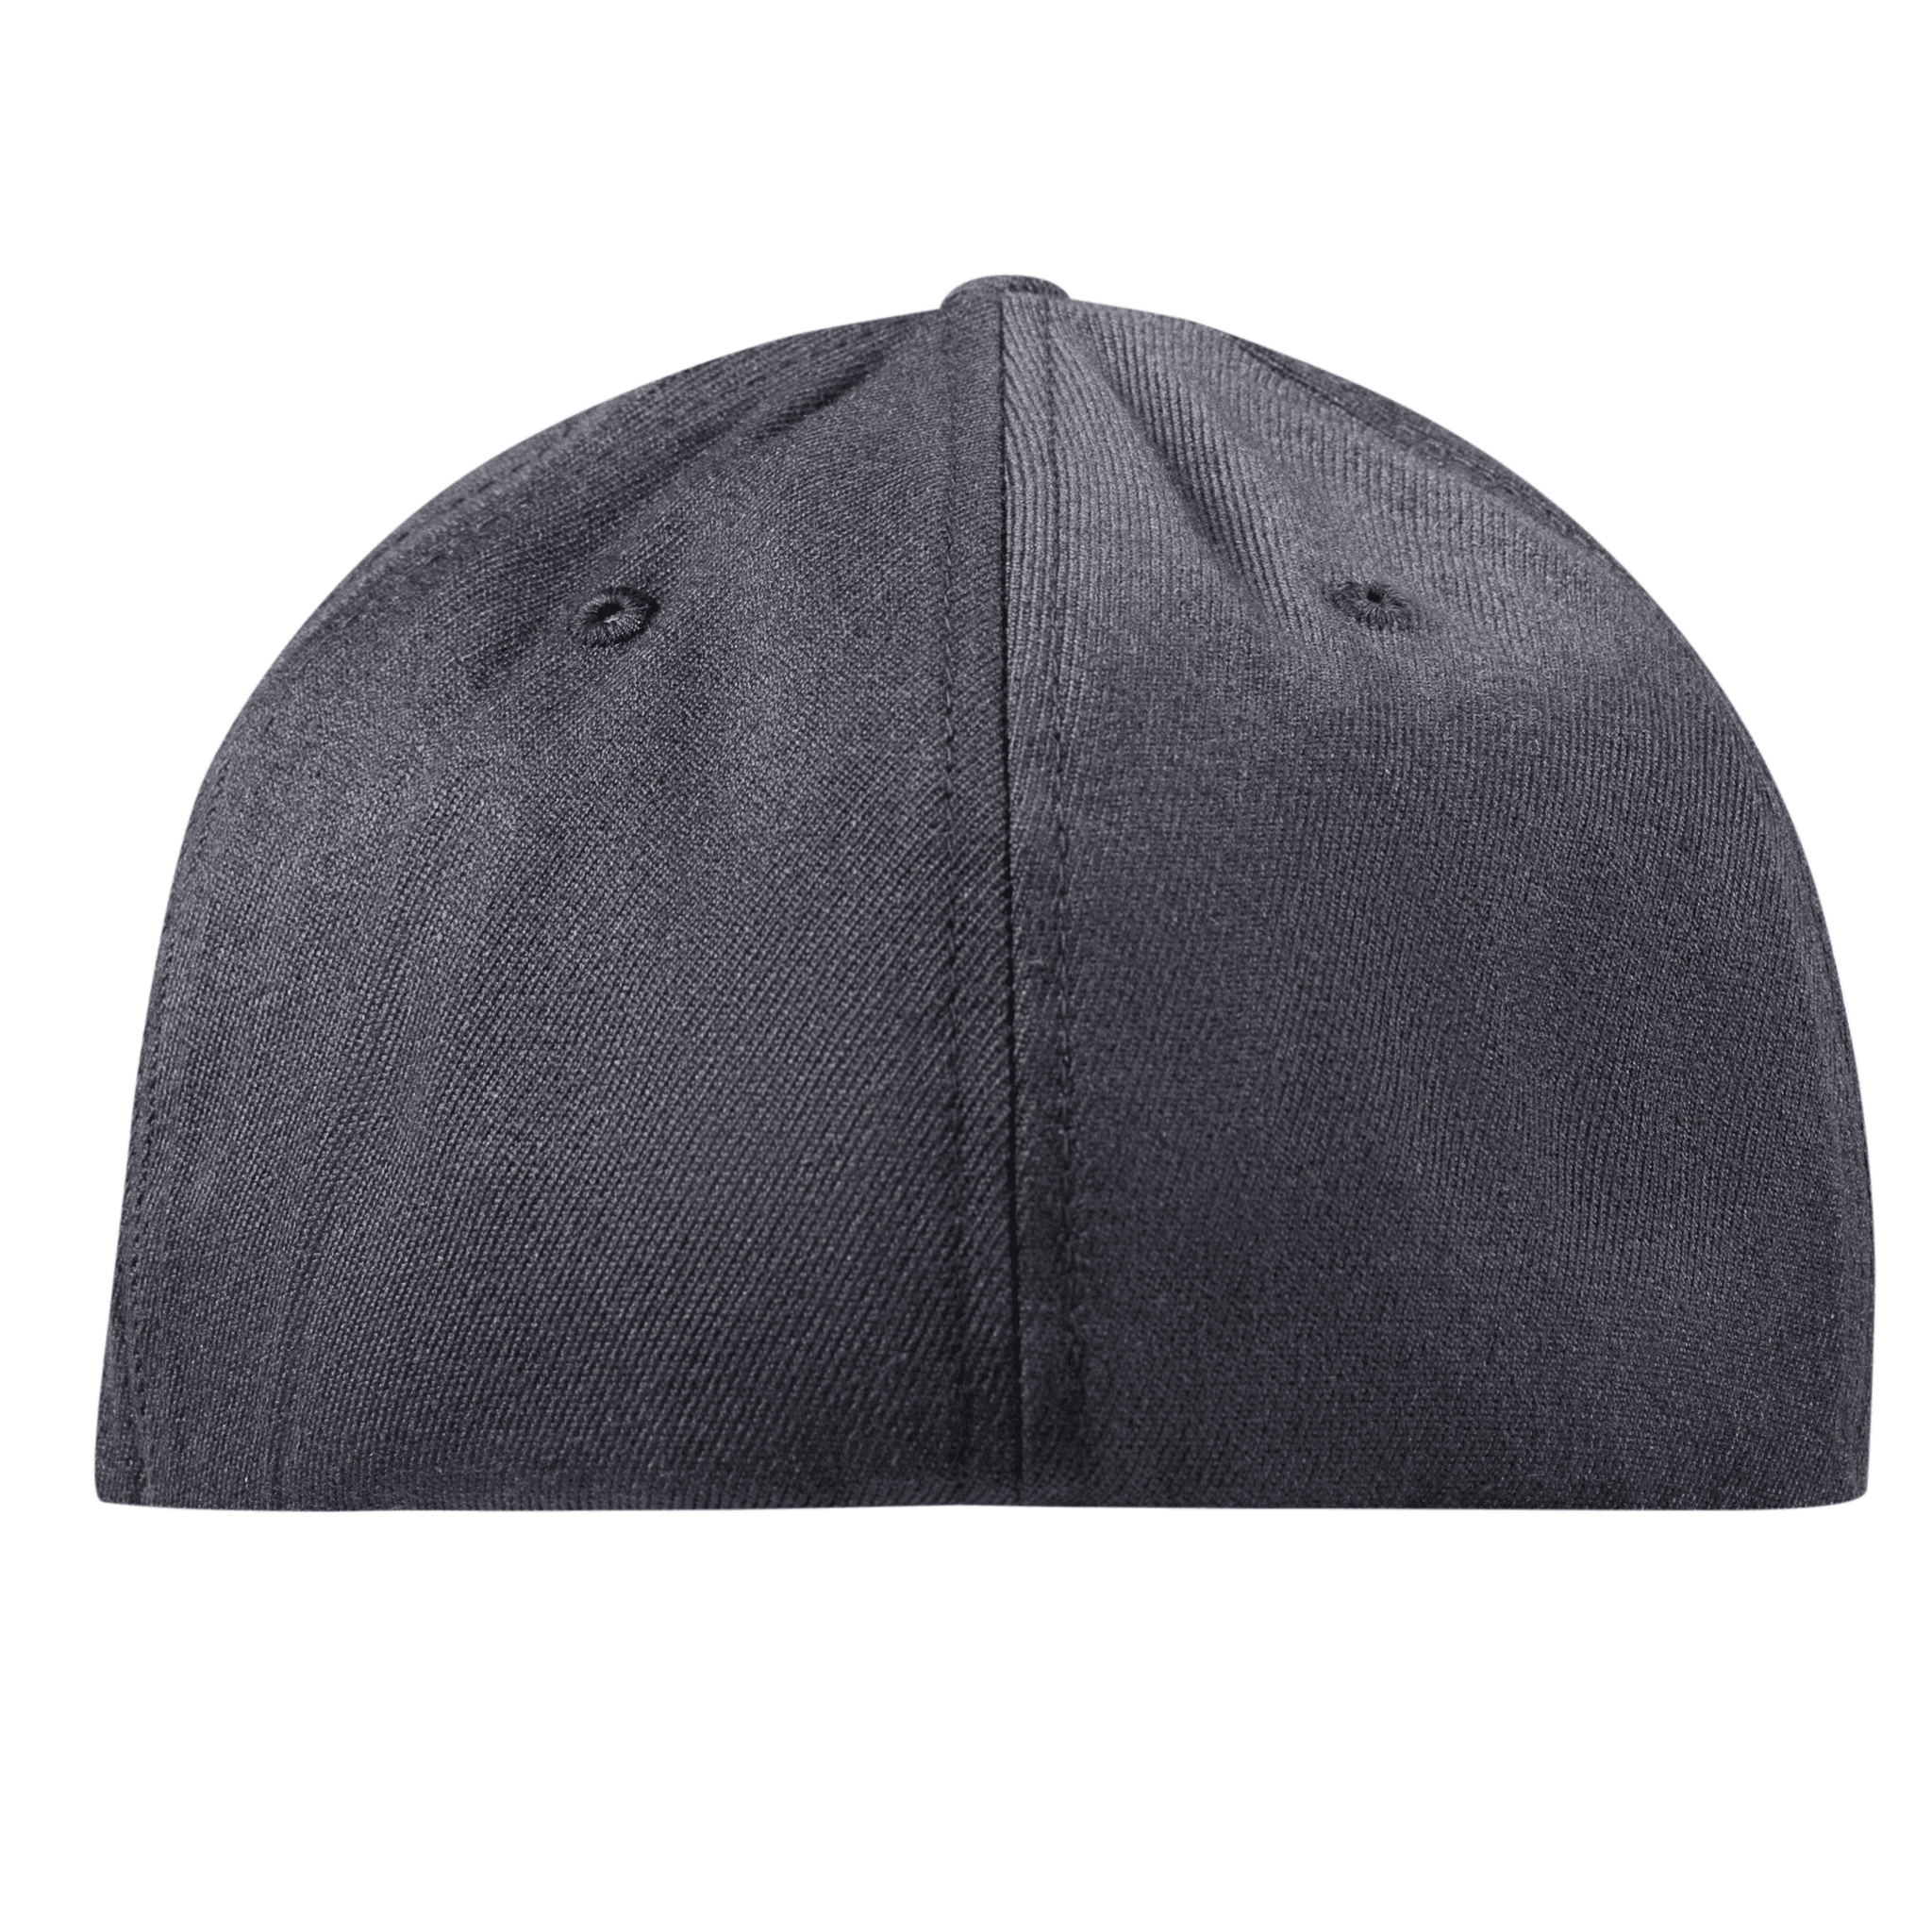 Washington Patriot Flexfit Fitted Back Charcoal